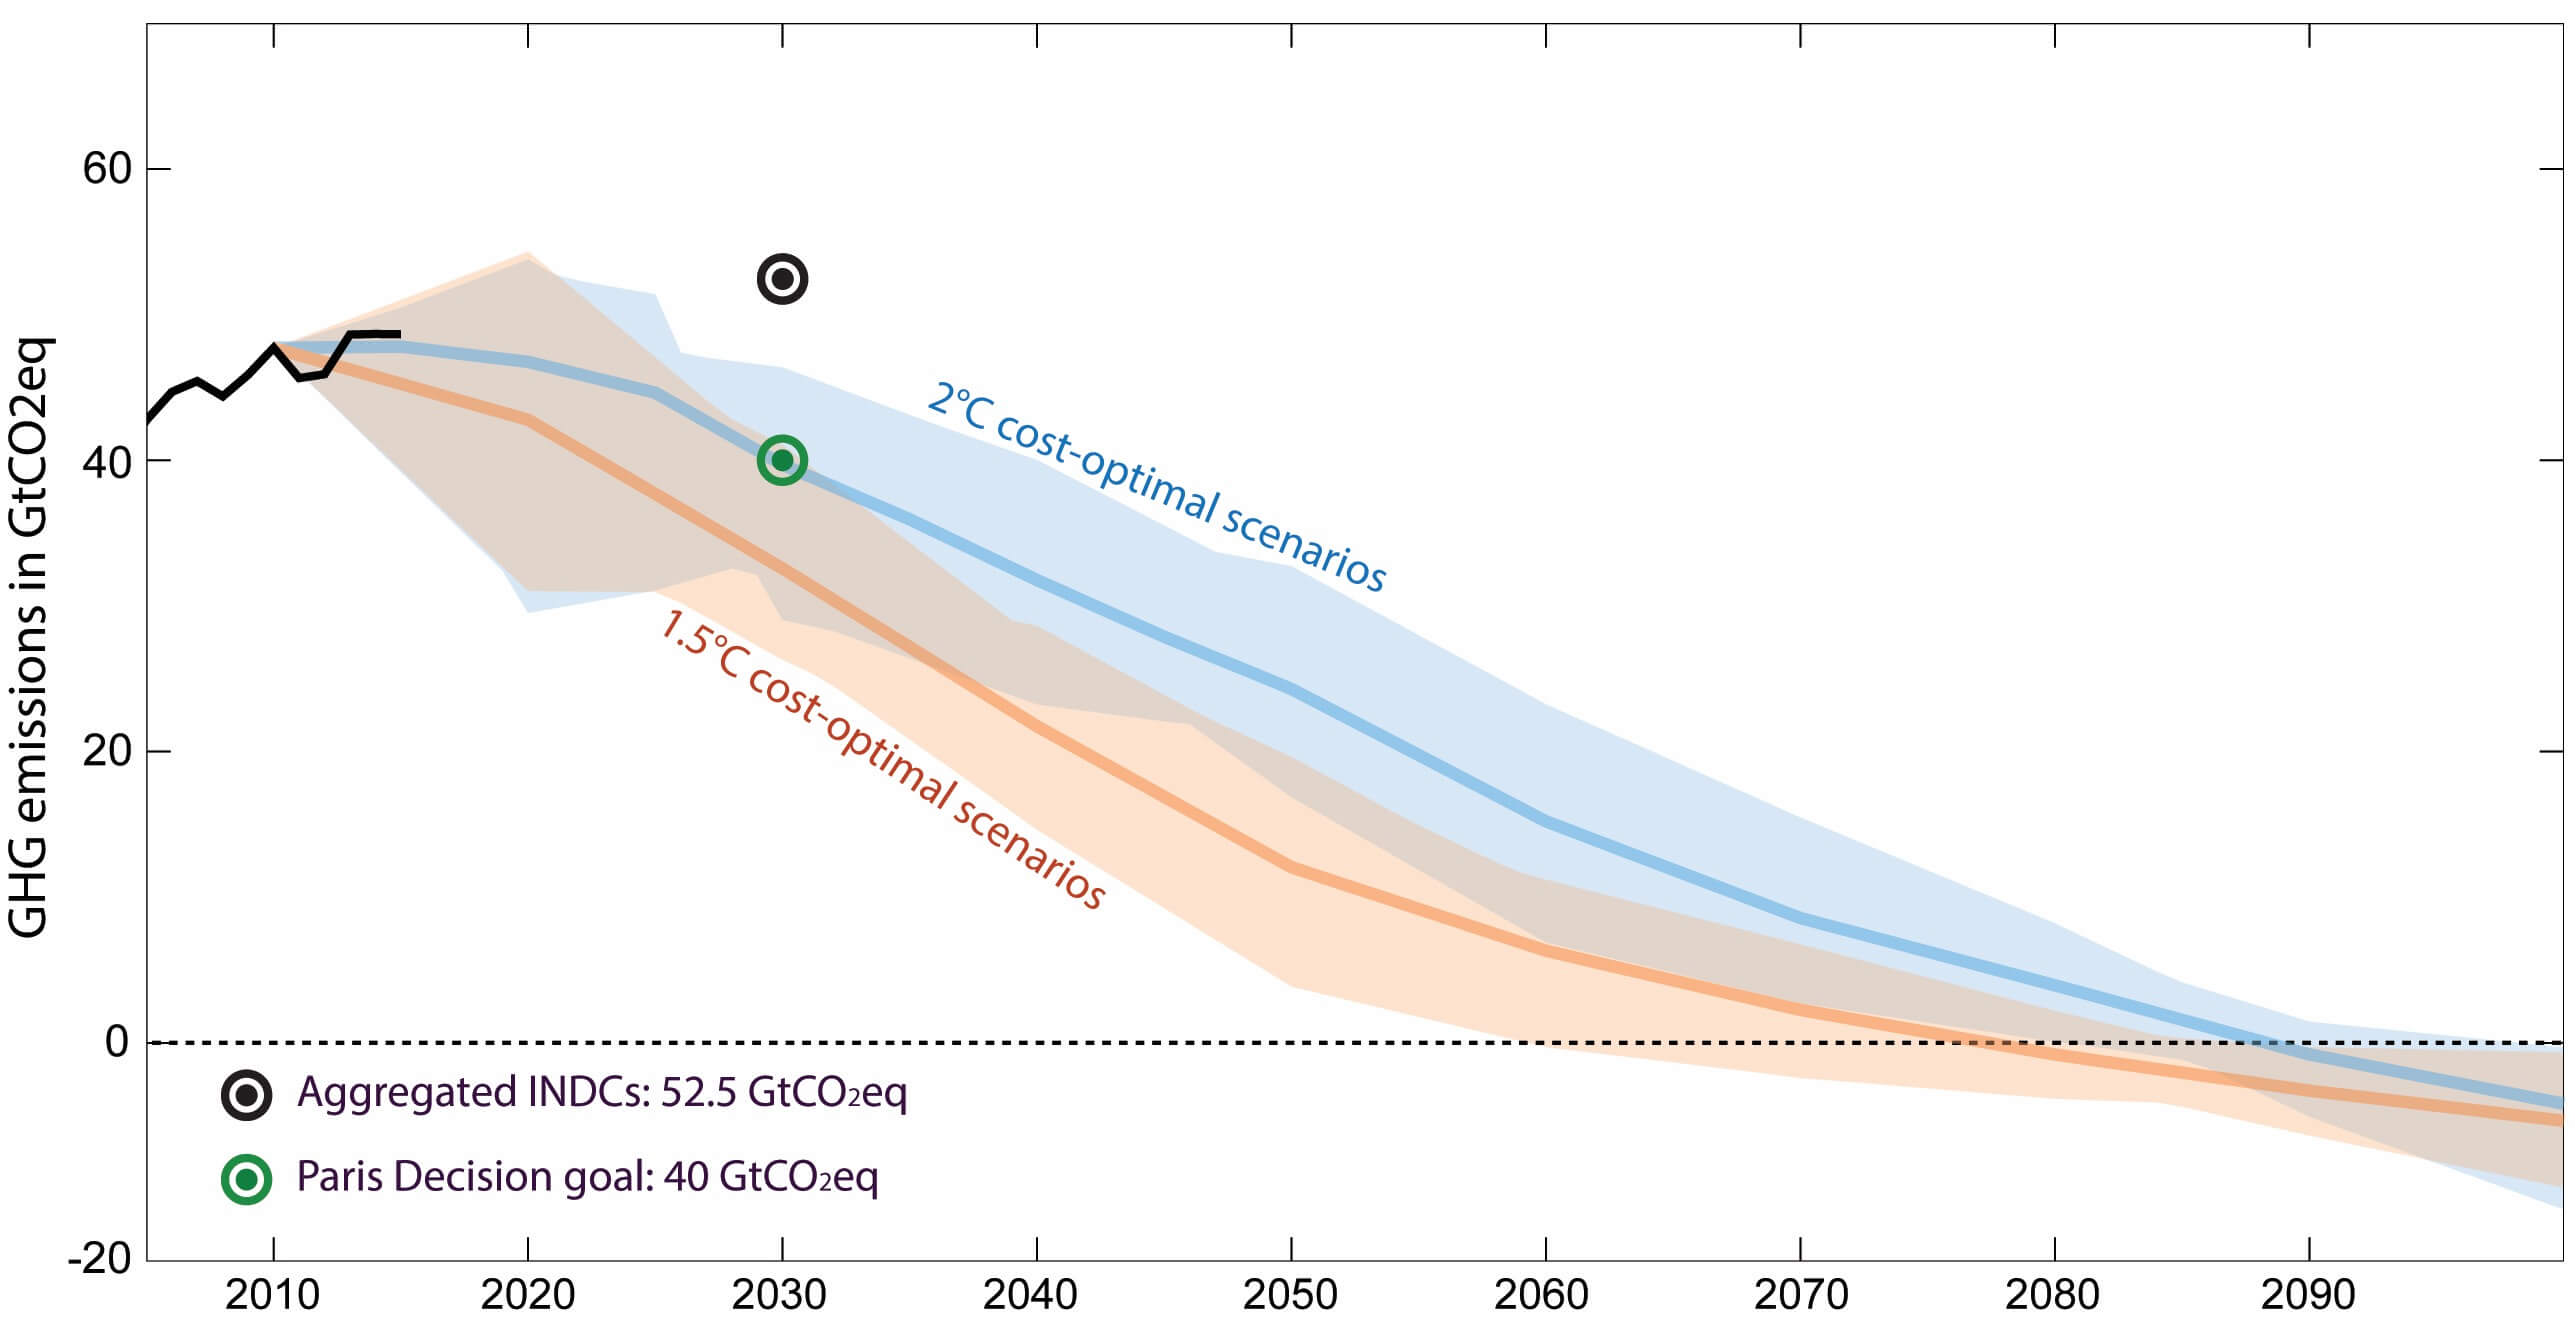 Range and average of global cost-optimal emissions scenarios consistent with the Paris Agreement goals.